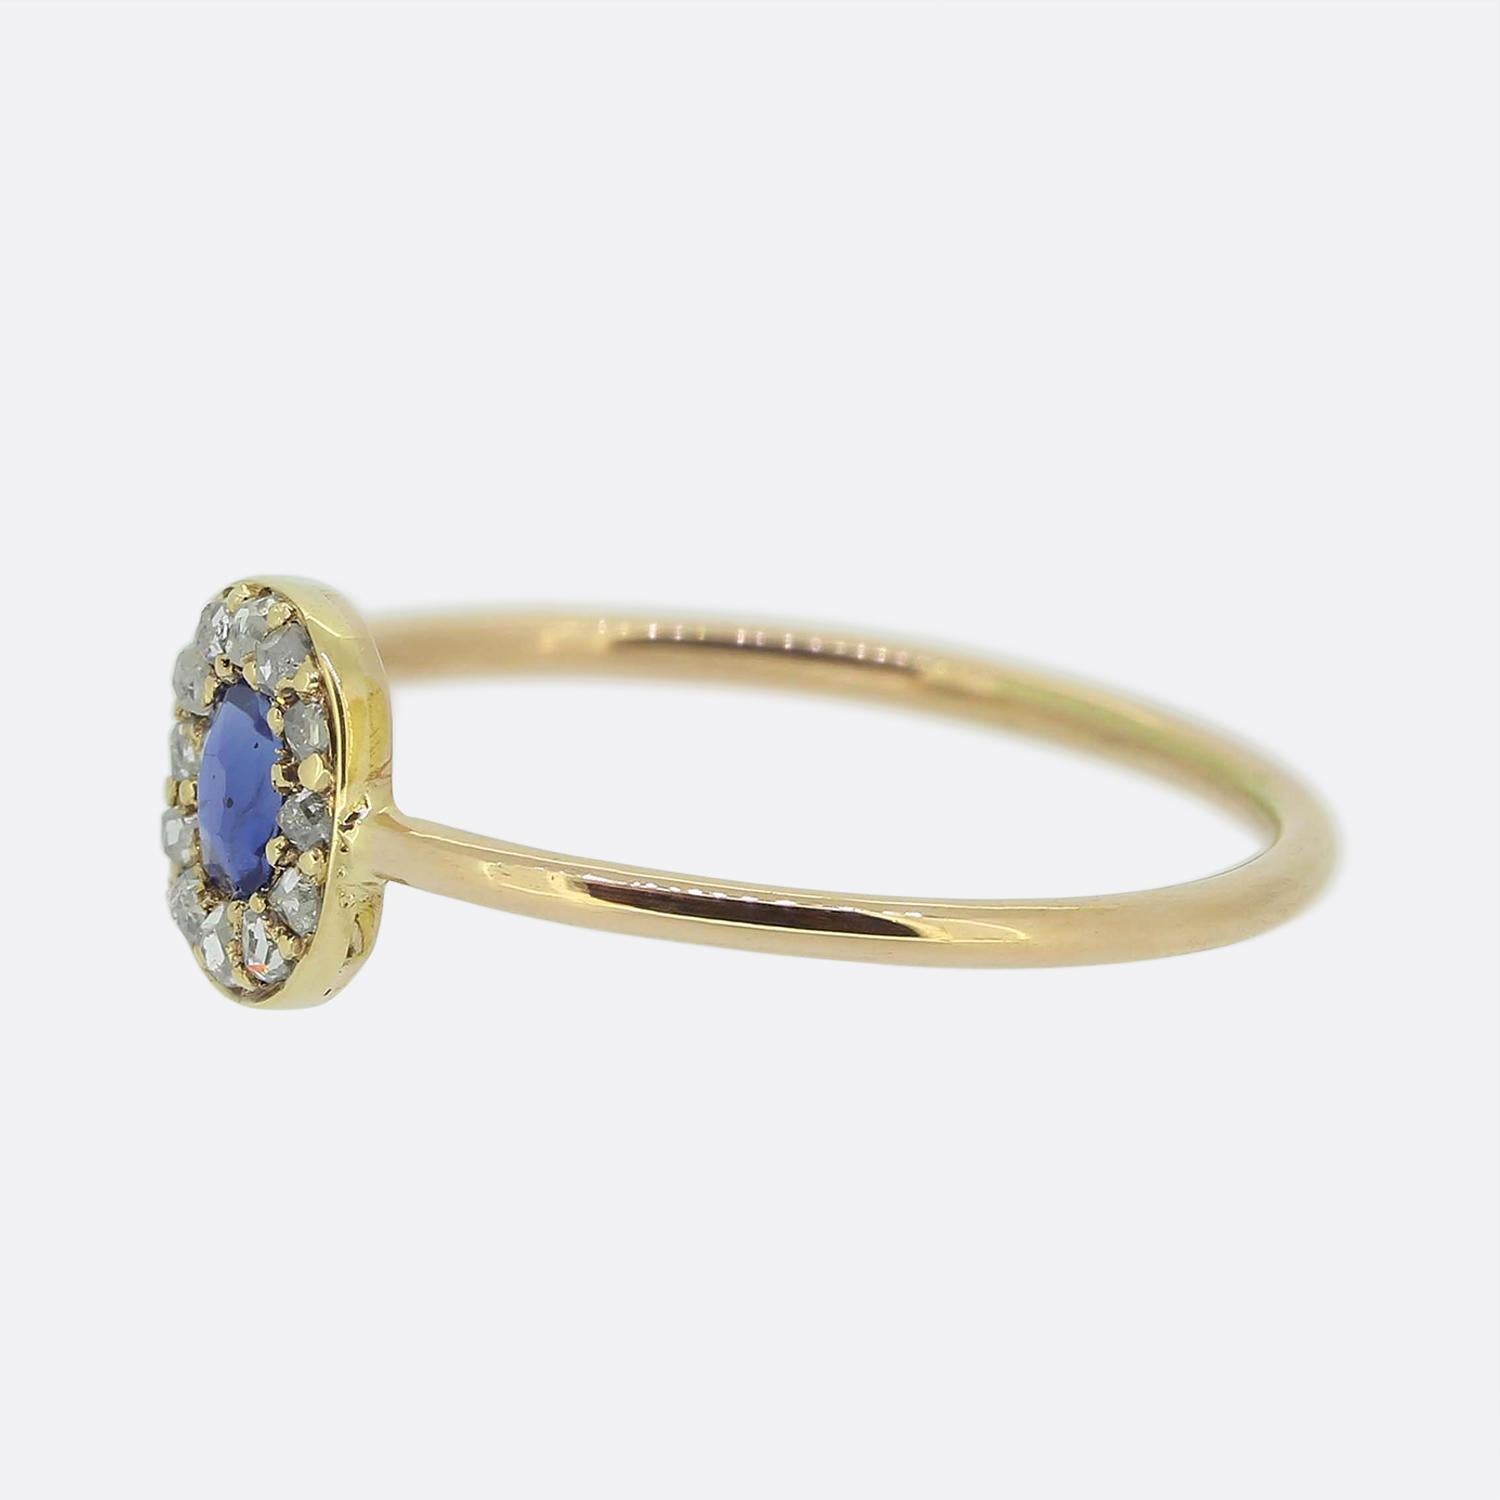 Here we have a delightful sapphire and diamond cluster ring. This piece originally dates back to the Victorian period with the head showcasing a single round faceted sapphire possessing a lively medium blue colour tone. This rich principal stone is